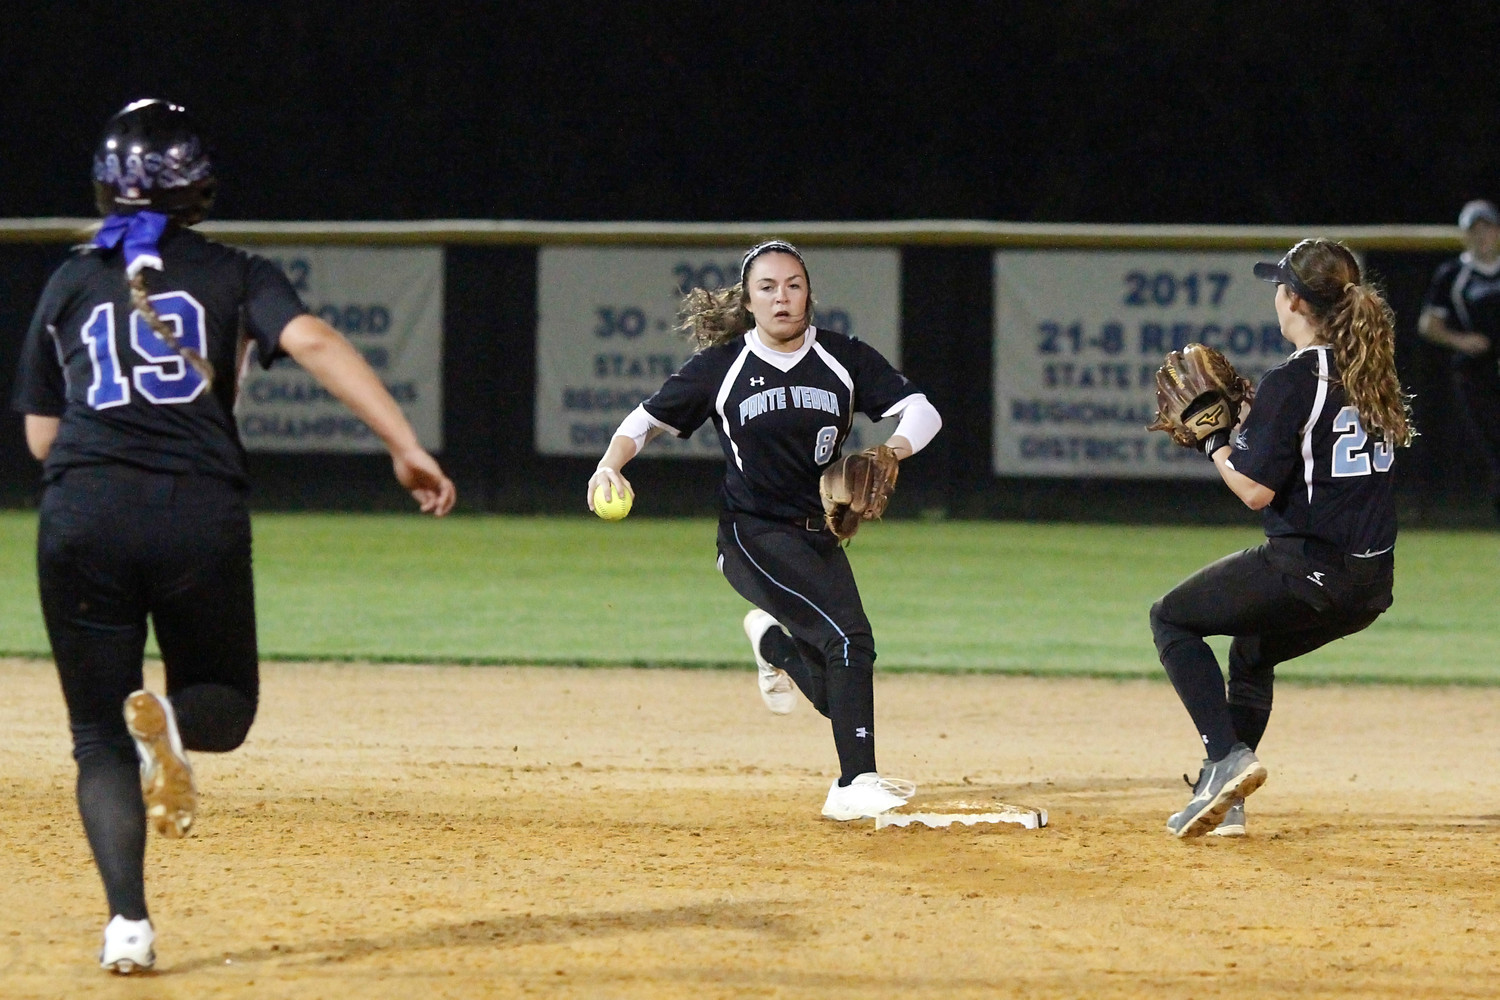 Sharks shortstop Michelle Leone retires the lead runner, but the throw to first was not in time to turn the double play.